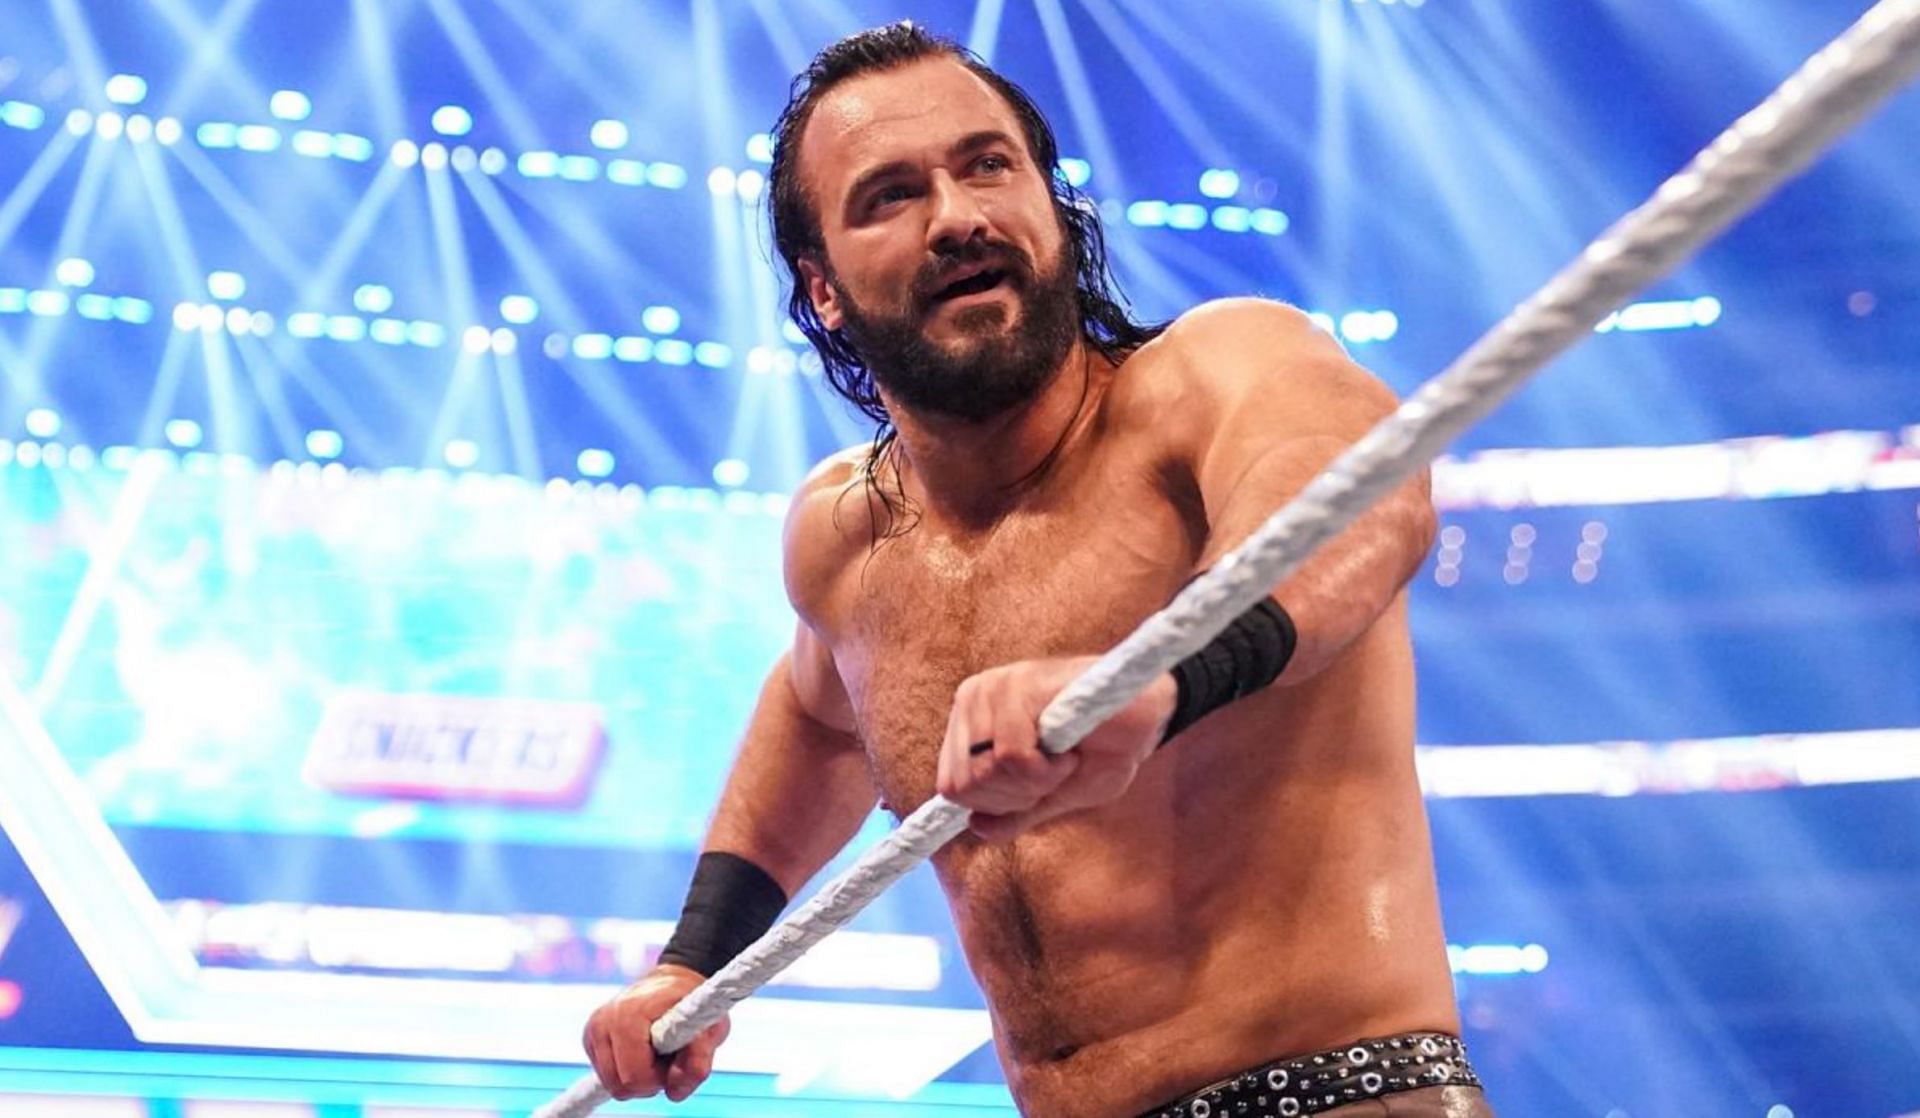 Drew McIntyre is one of the top babyfaces in WWE.